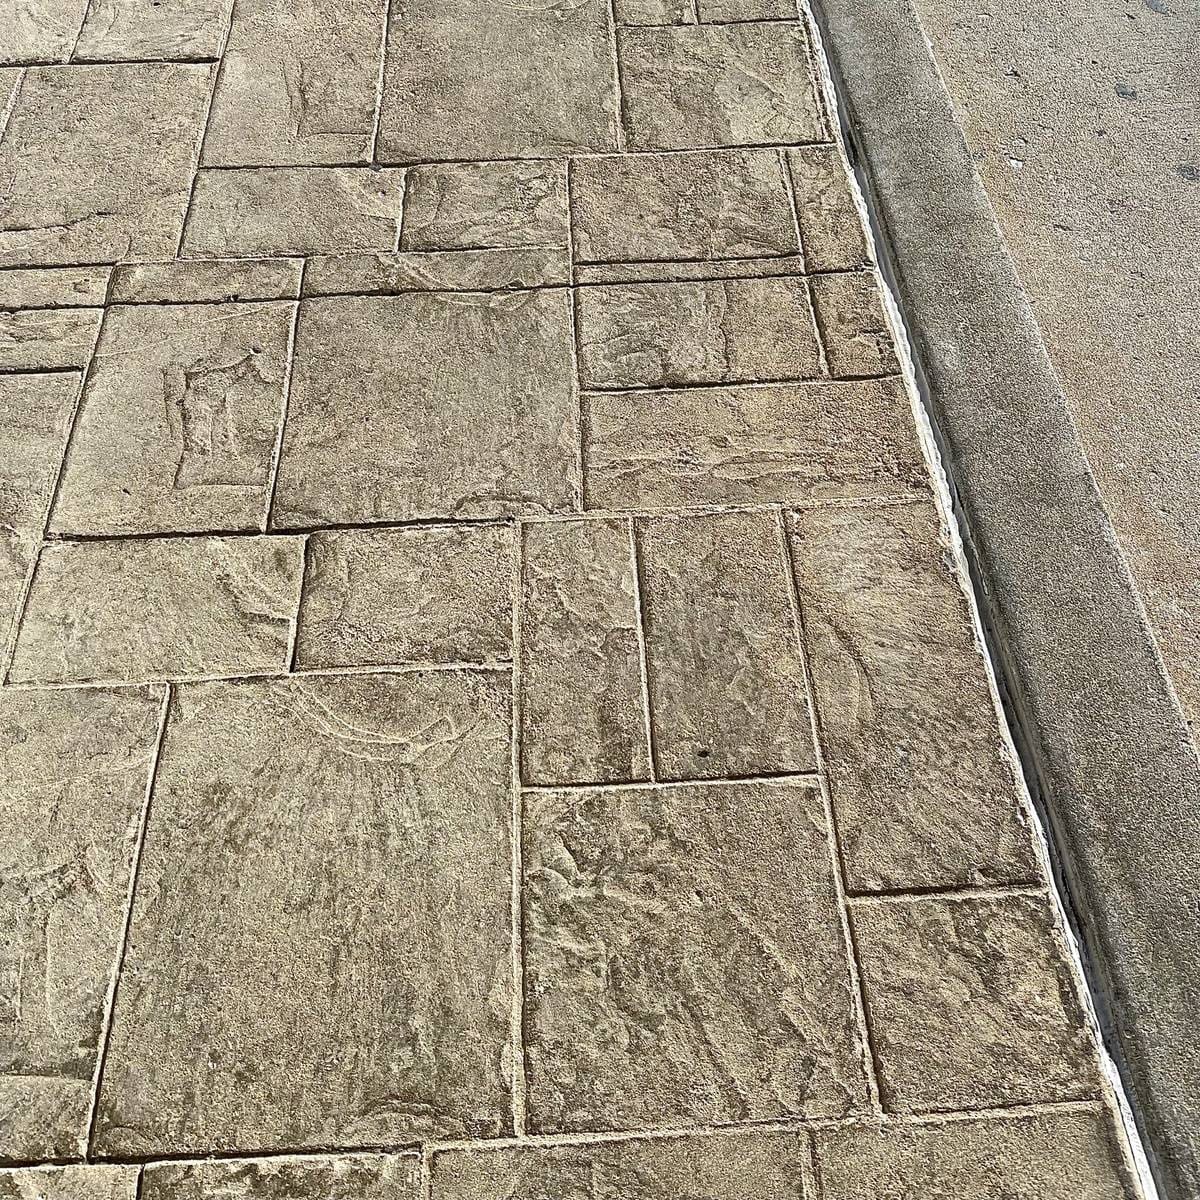 Stamped concrete curbs